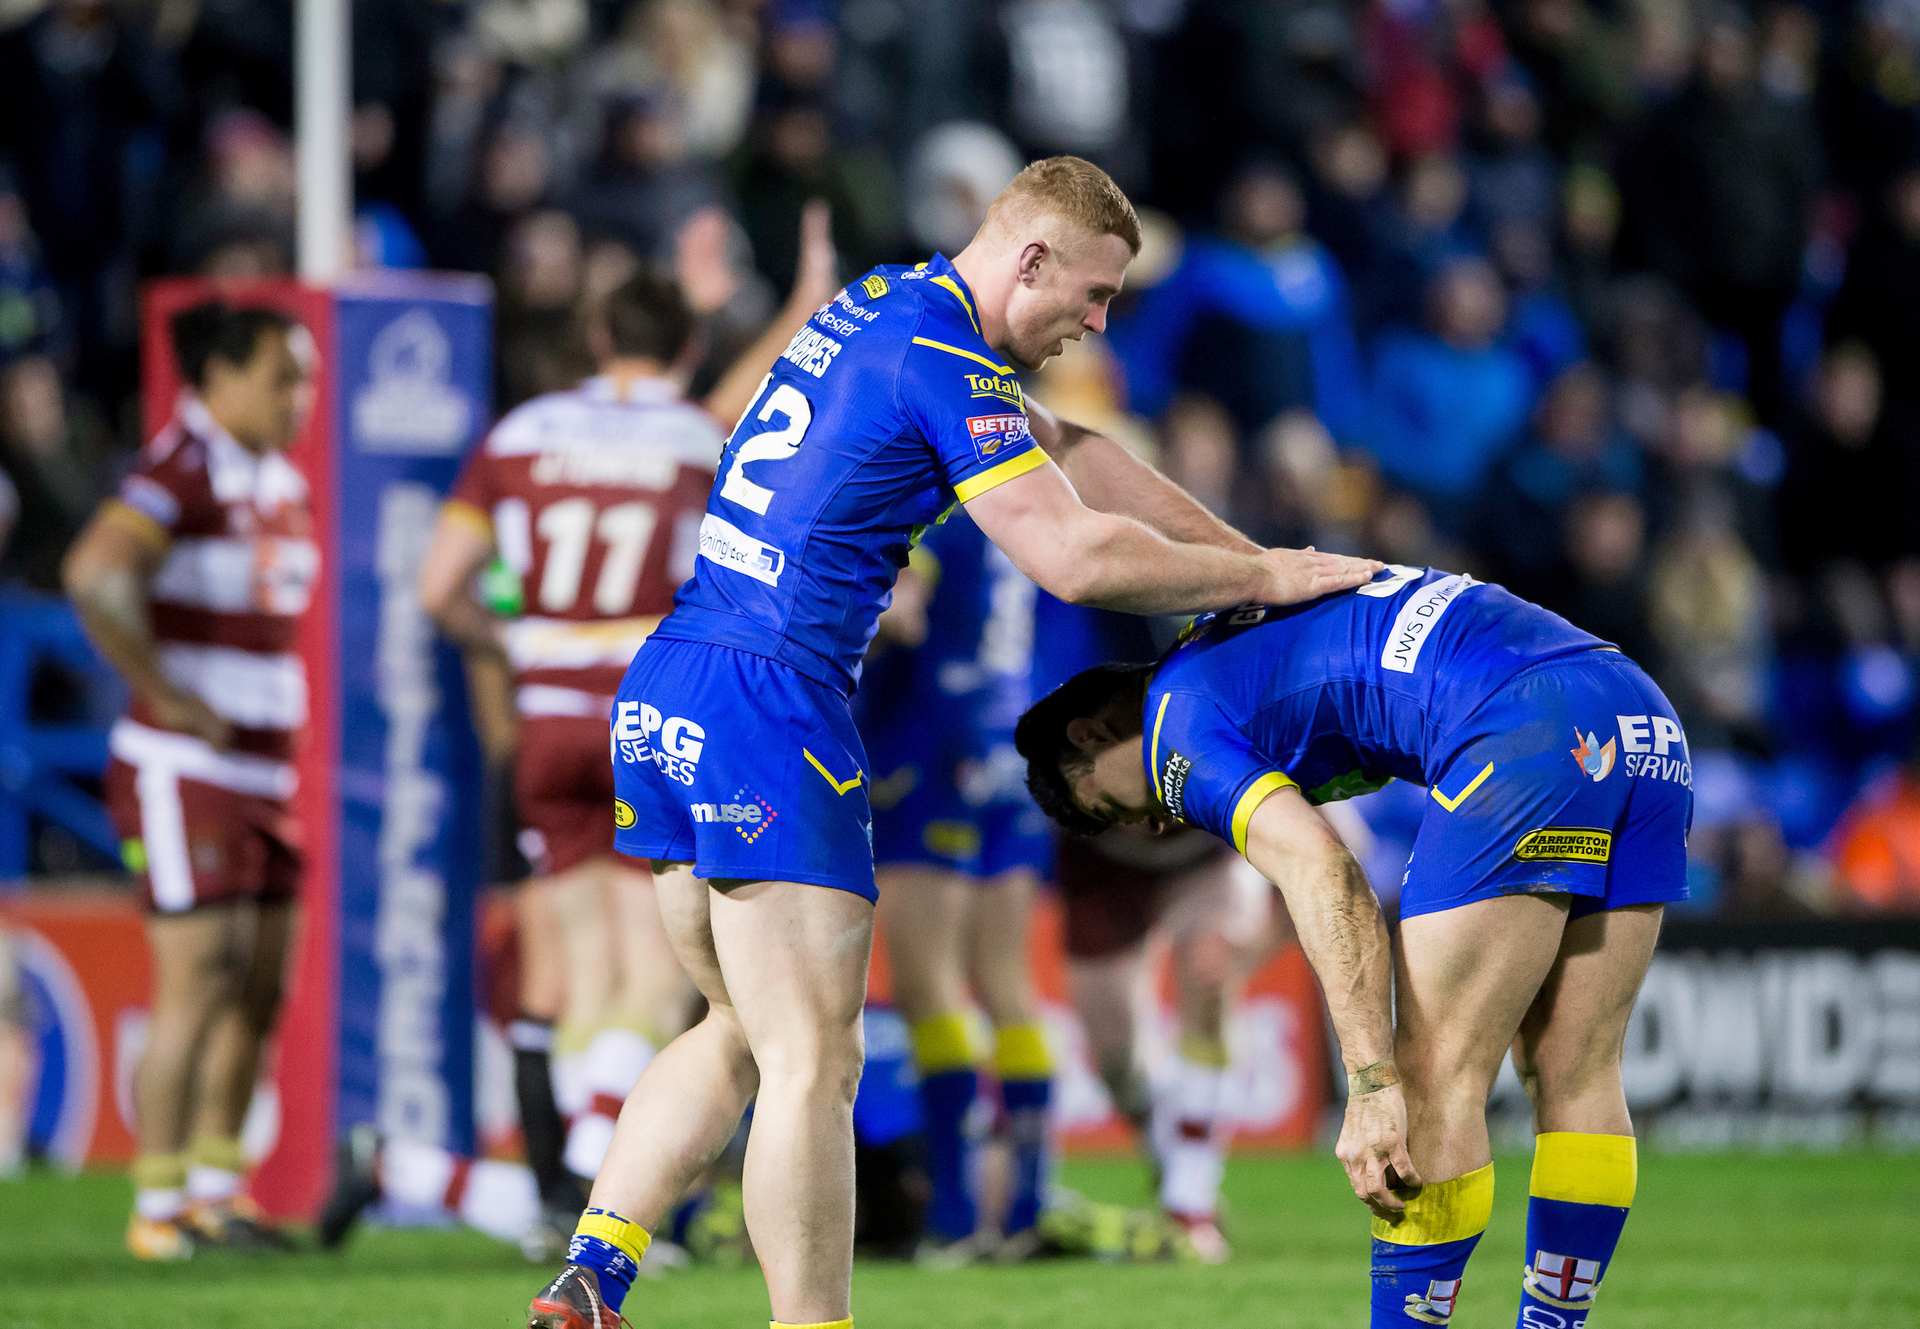 Rugby League Warrington Wolves co-captain played on despite rupturing testicle